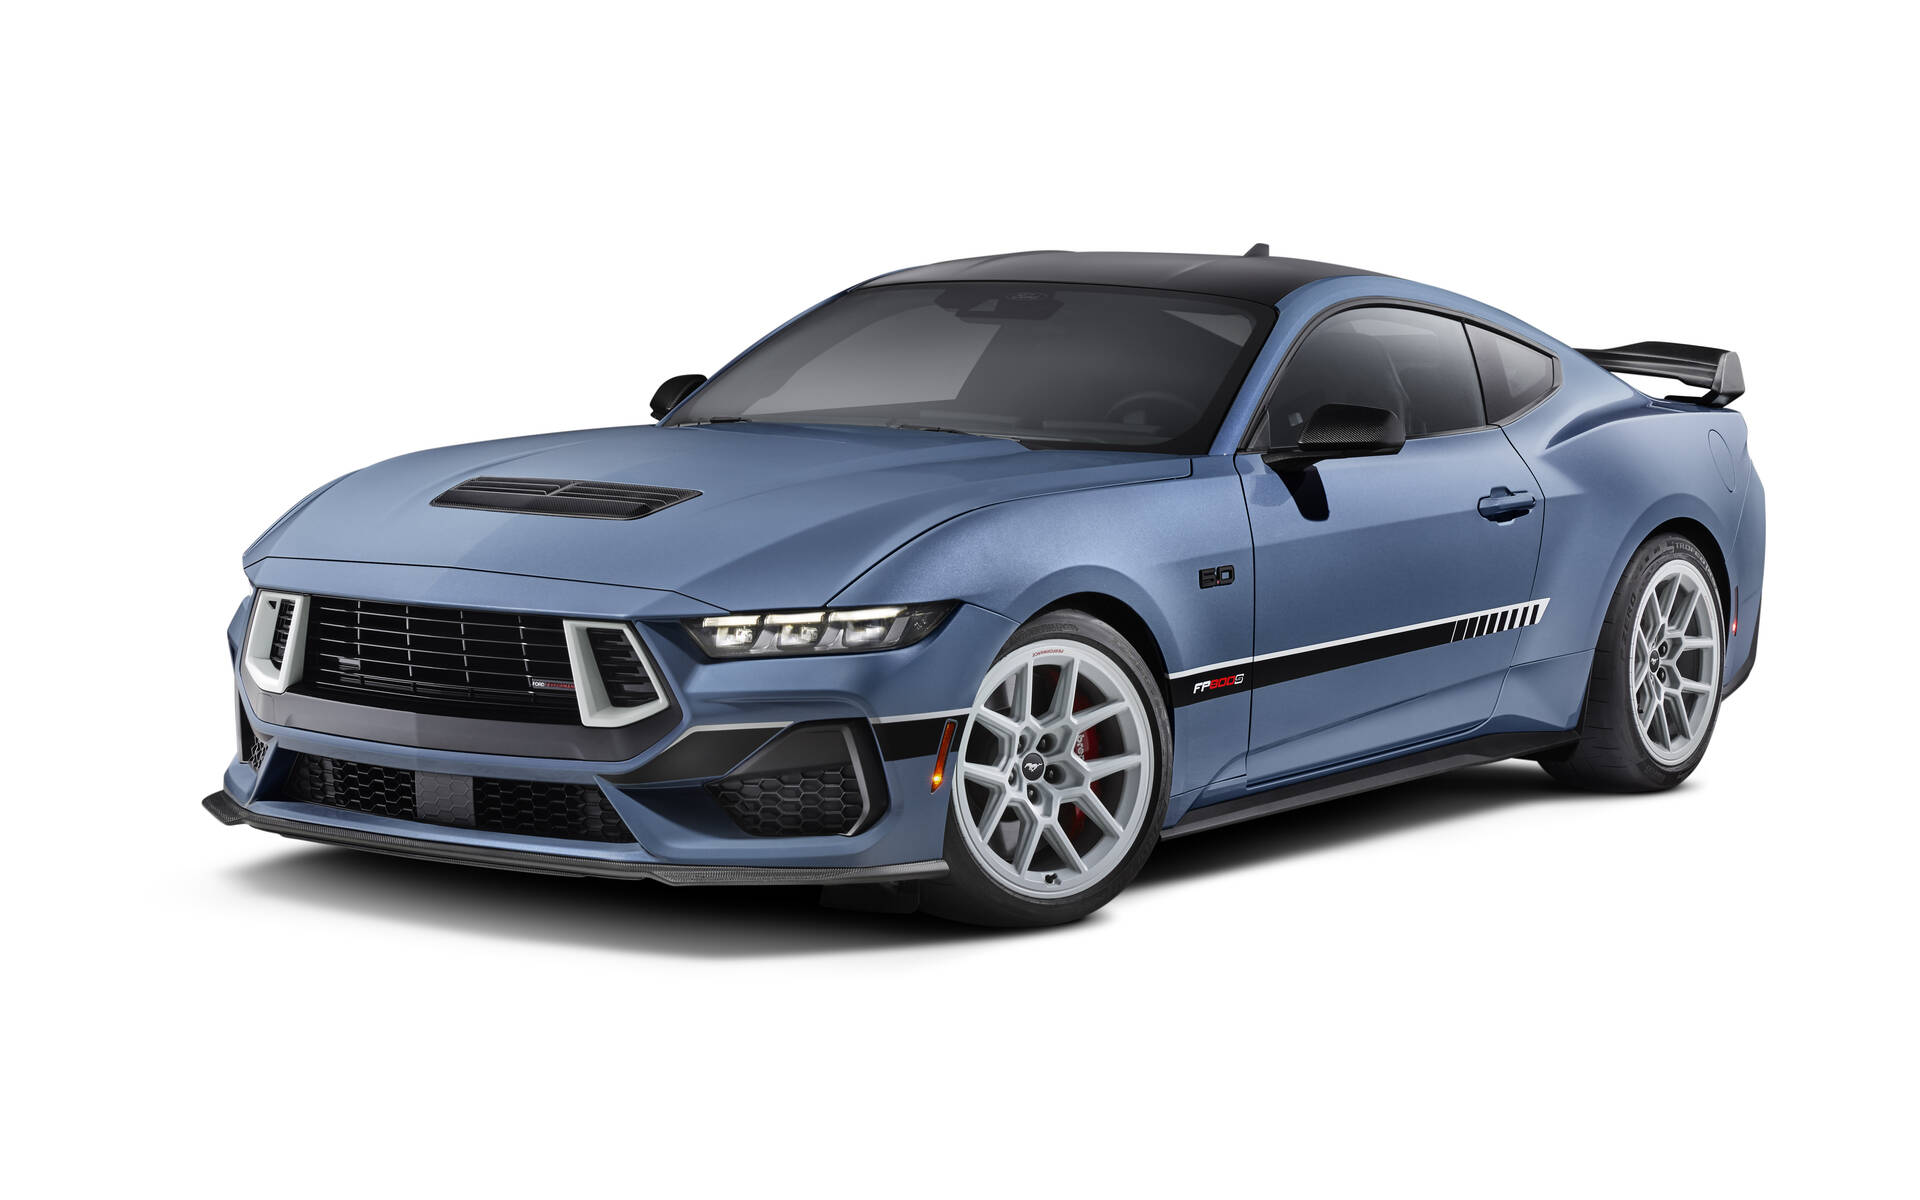 Ford Mustang FP800S concept